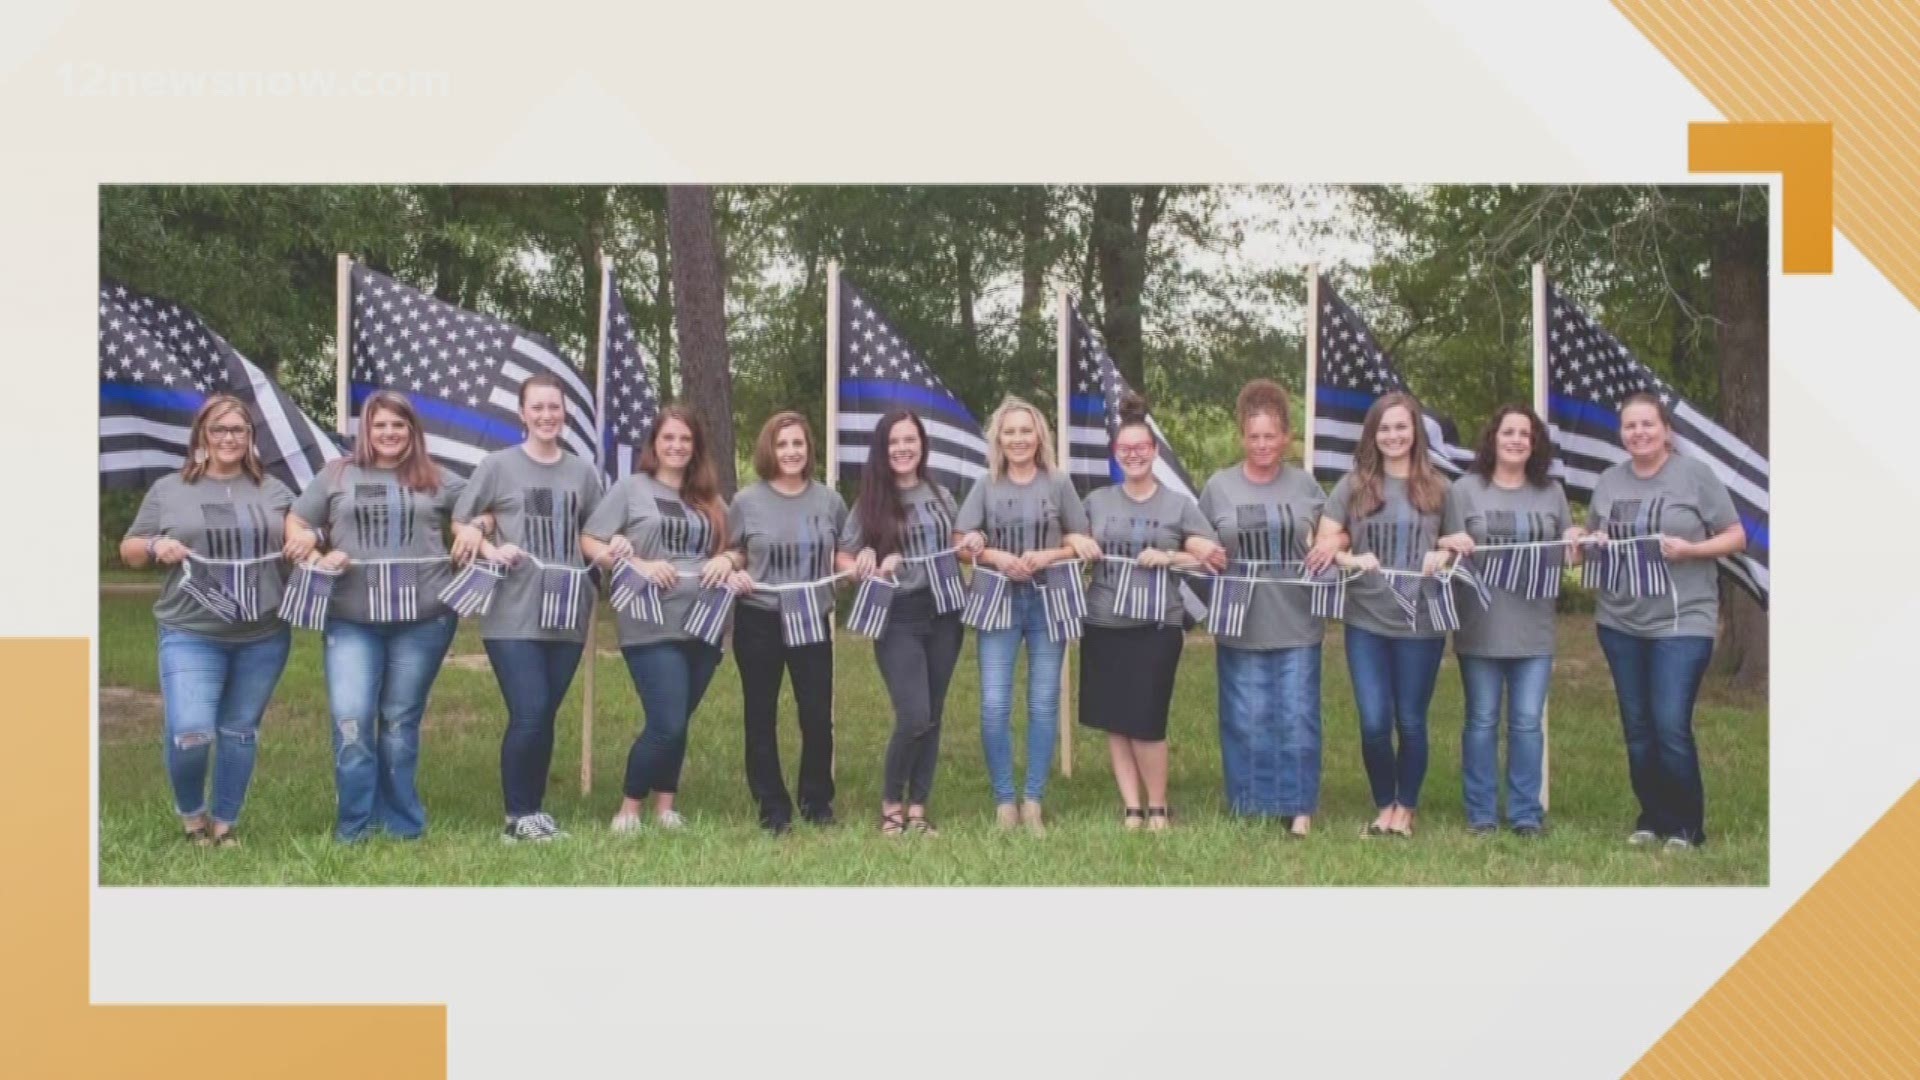 The Lumberton Police officers' wives stood in a line of unity to support their husbands, all holding American flags with the thin blue line.